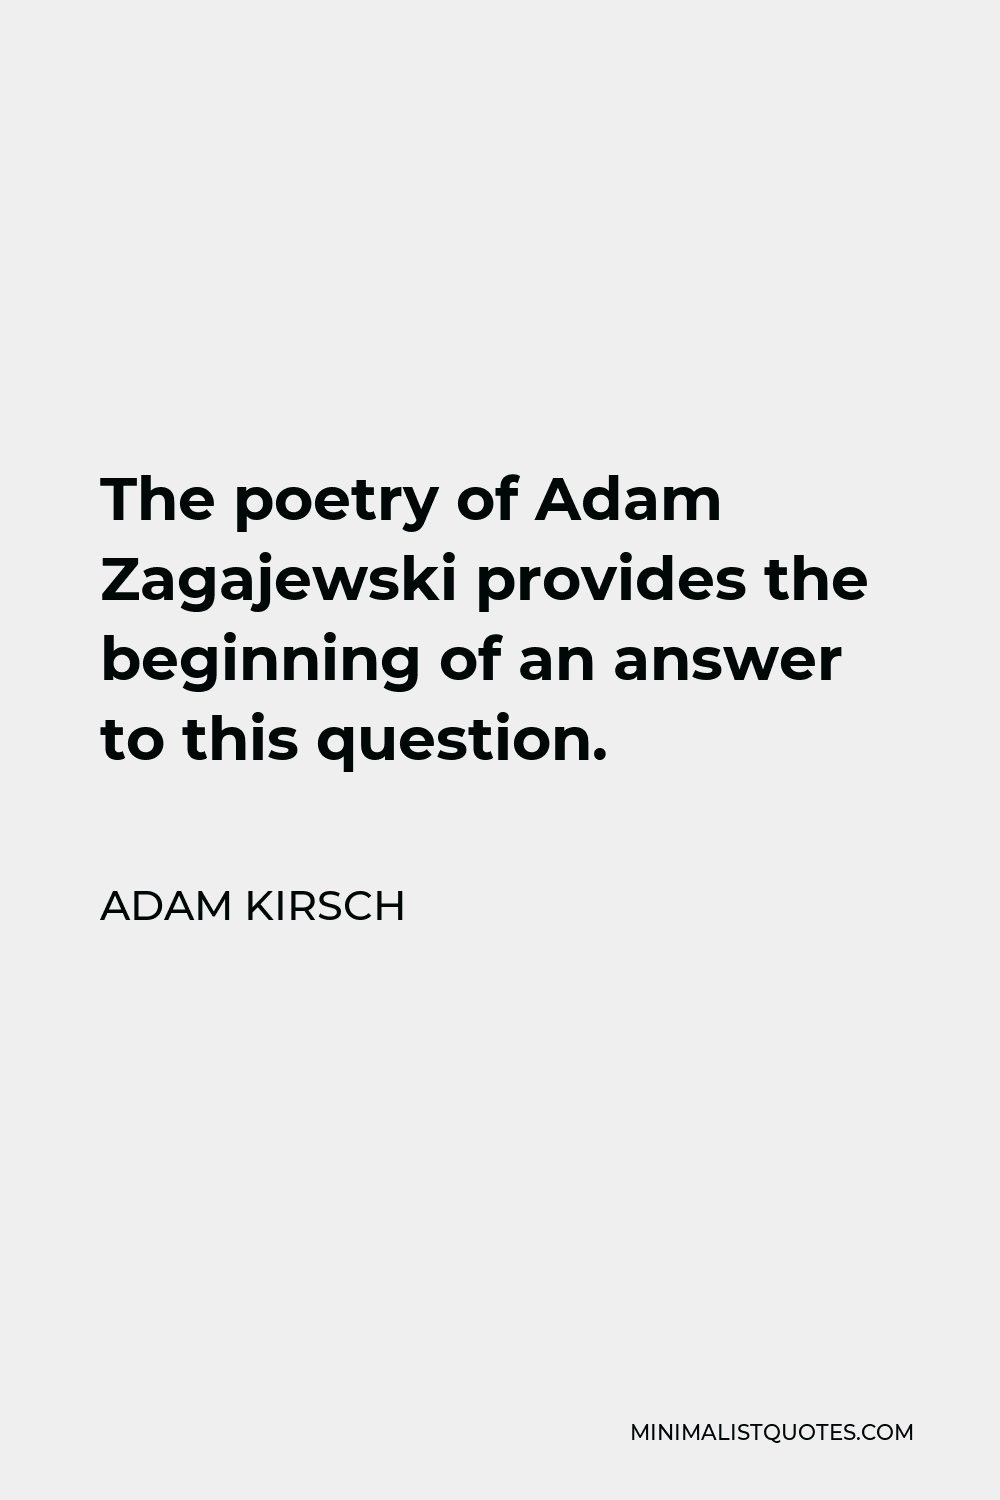 Adam Kirsch Quote - The poetry of Adam Zagajewski provides the beginning of an answer to this question.